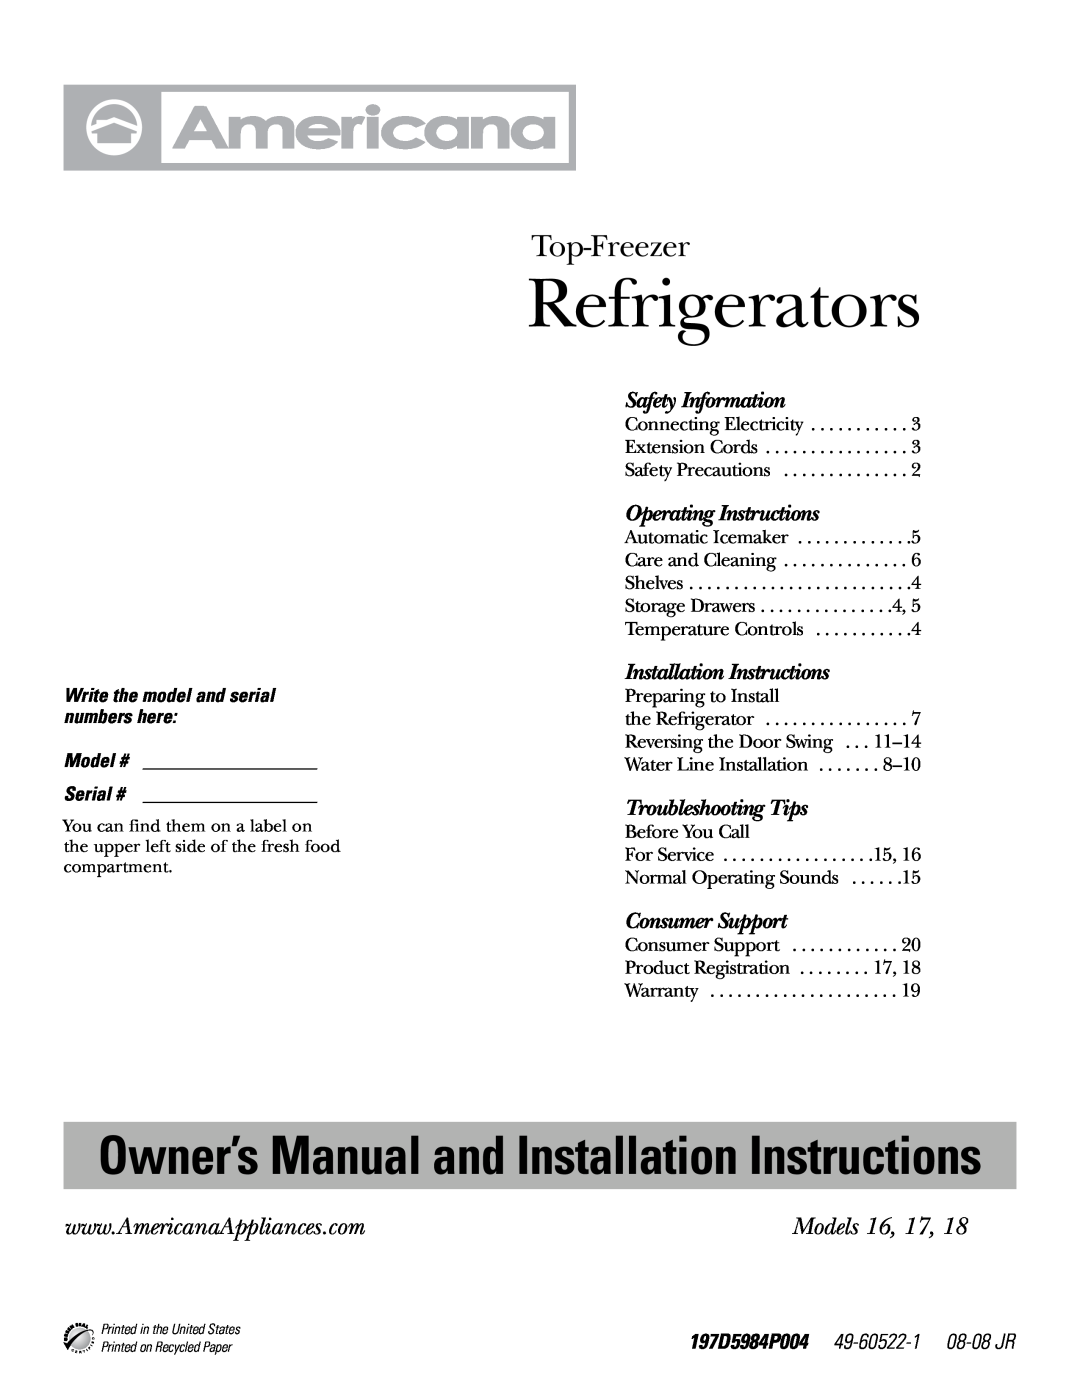 Americana Appliances 197D5984P004 installation instructions Refrigerators, Owner’s Manual and Installation Instructions 